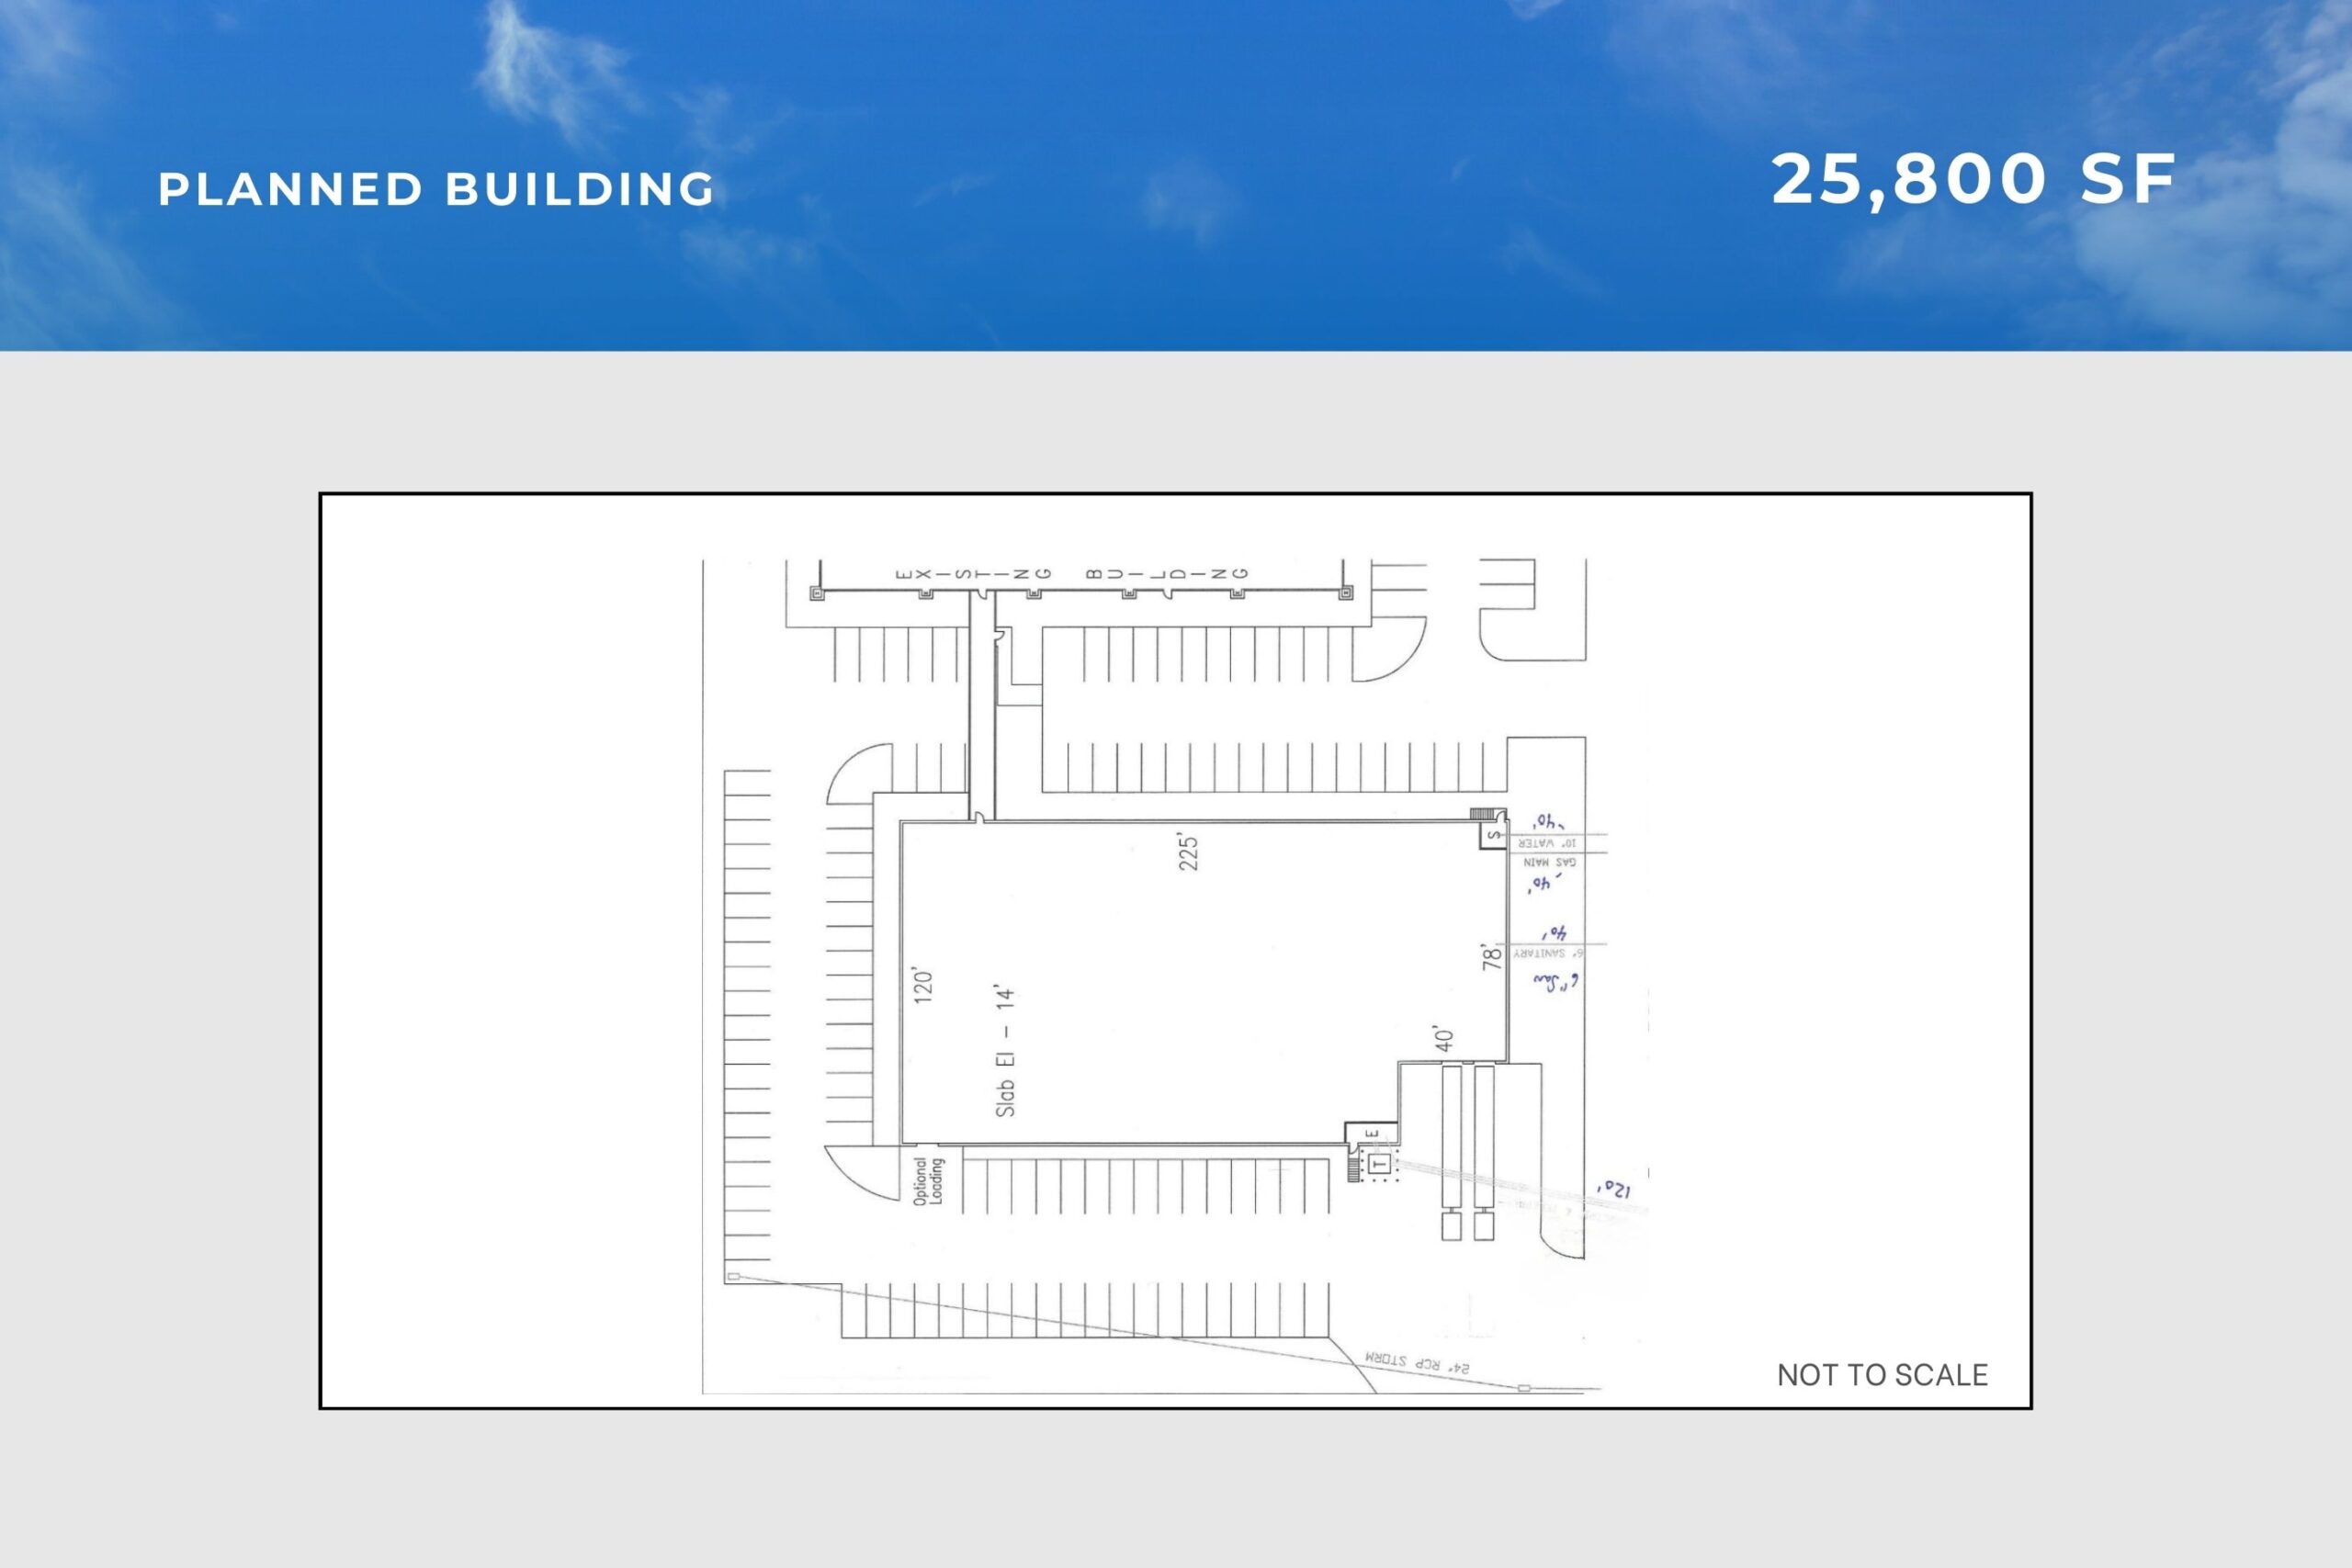 Plans for a 25,800 SF Building